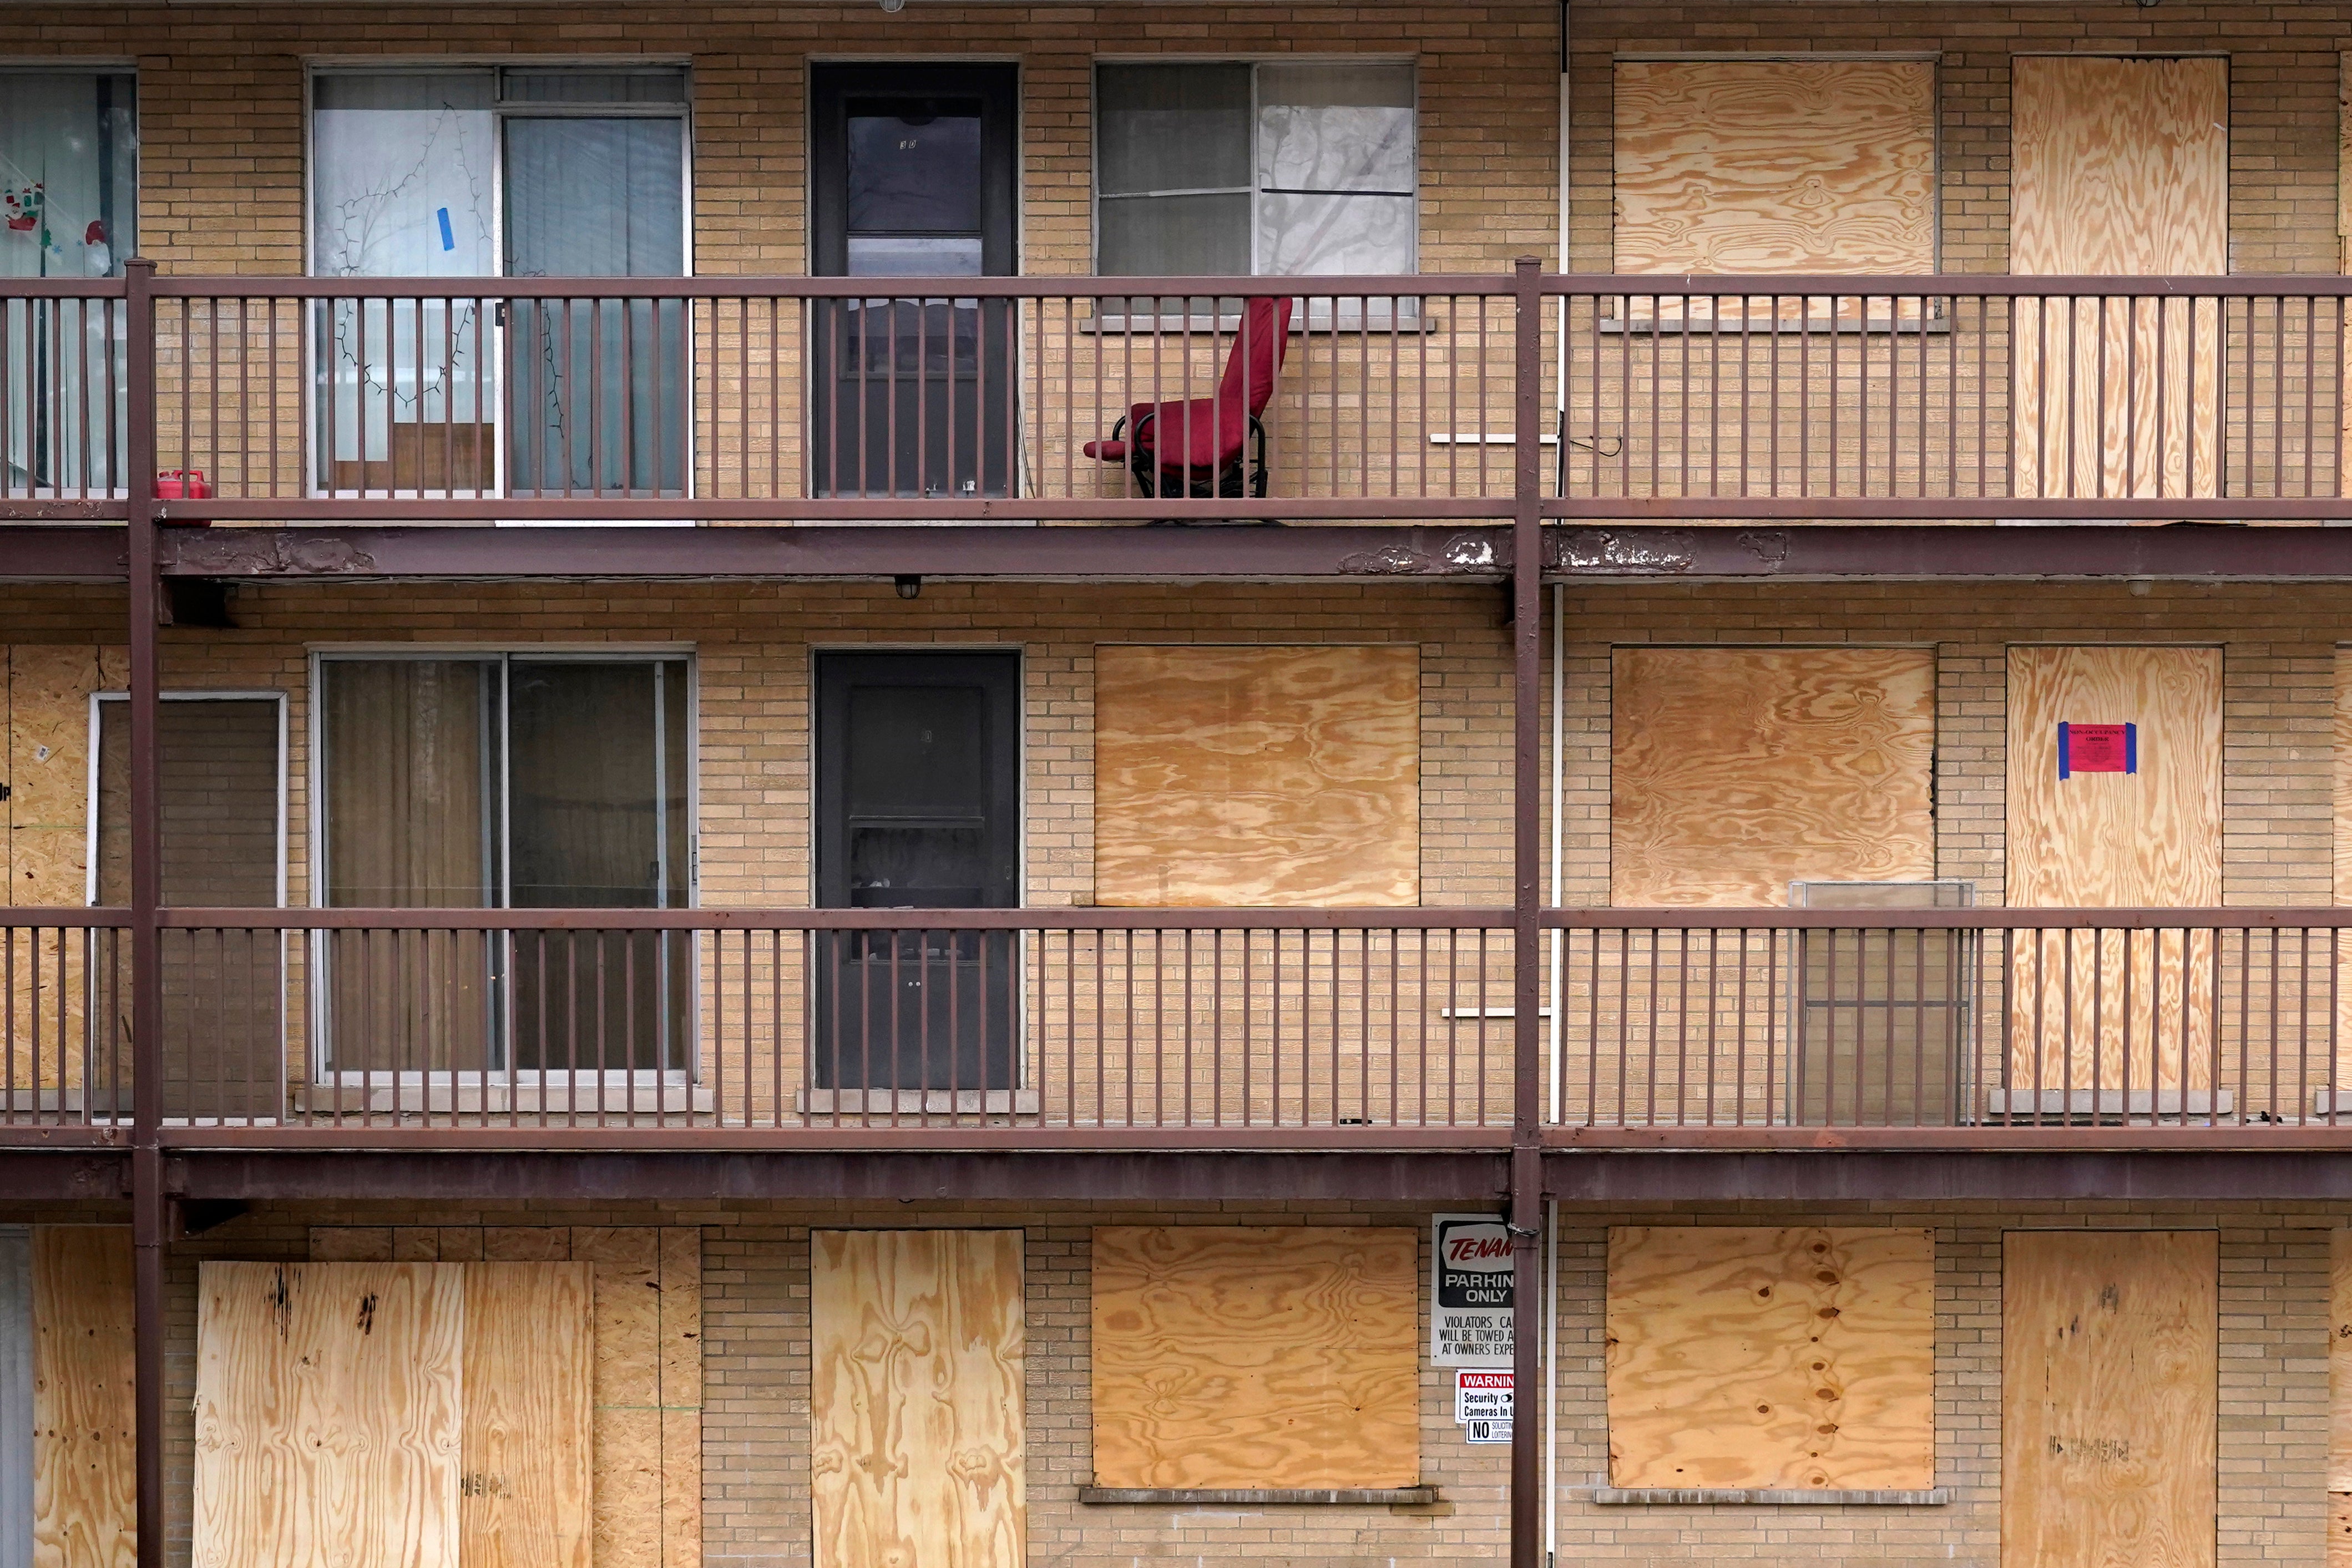 Apartments boarded up while tenants were still inside in Harvey, Illinois